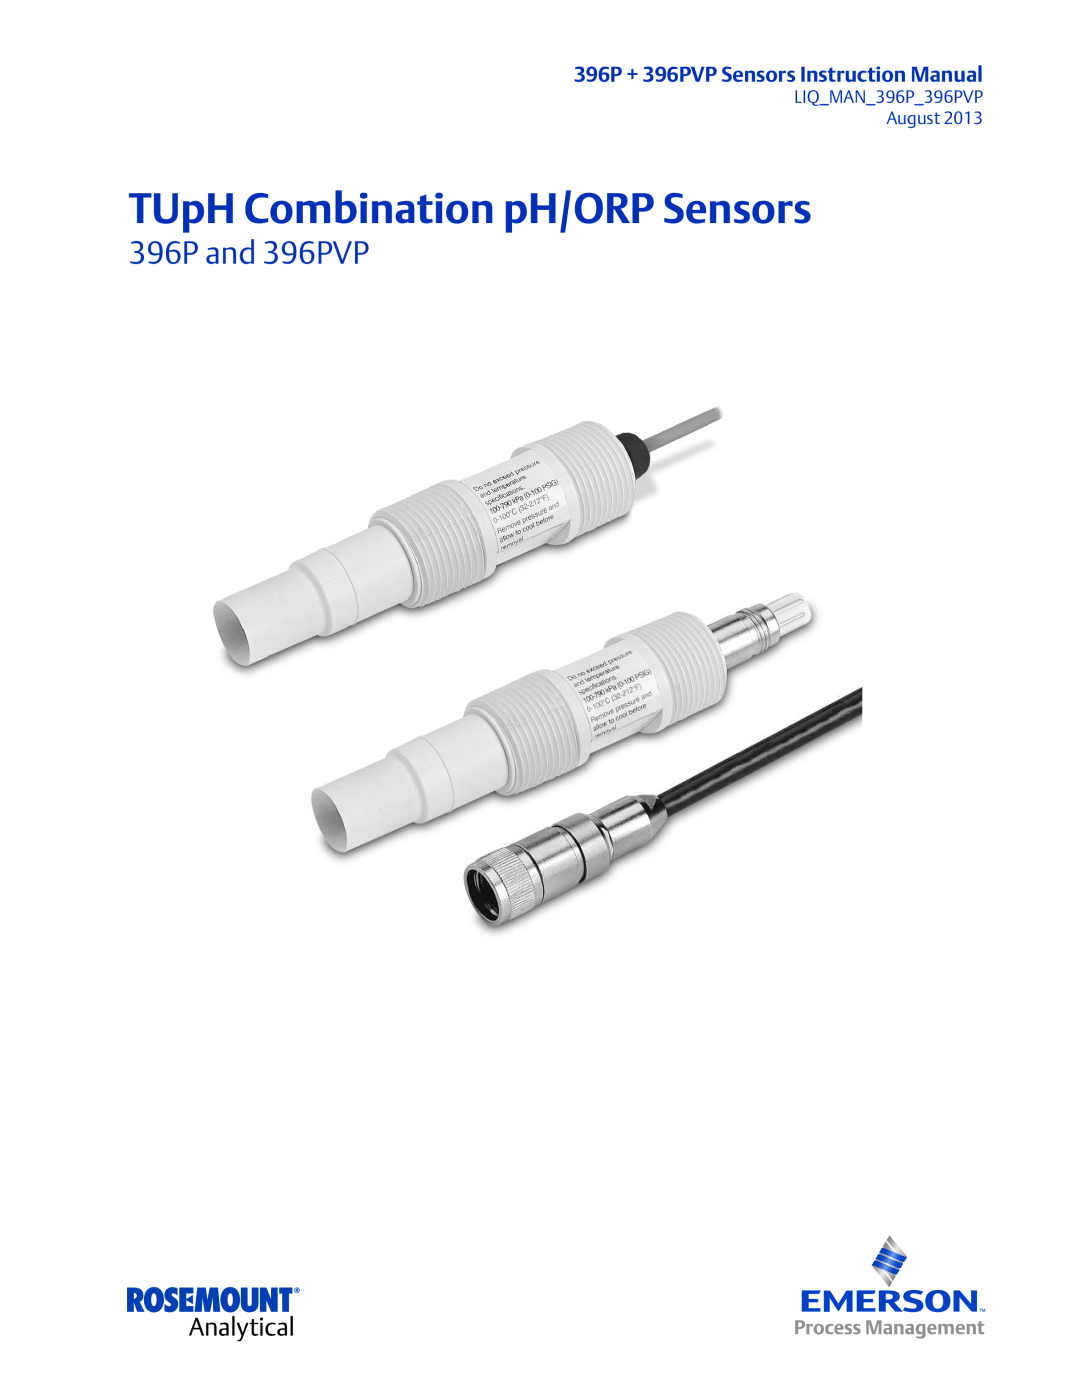 Emerson instruction manual TUpH Combination pH/ORP Sensors, 396P + 396PVP Sensors Instruction Manual, 396P and 396PVP 